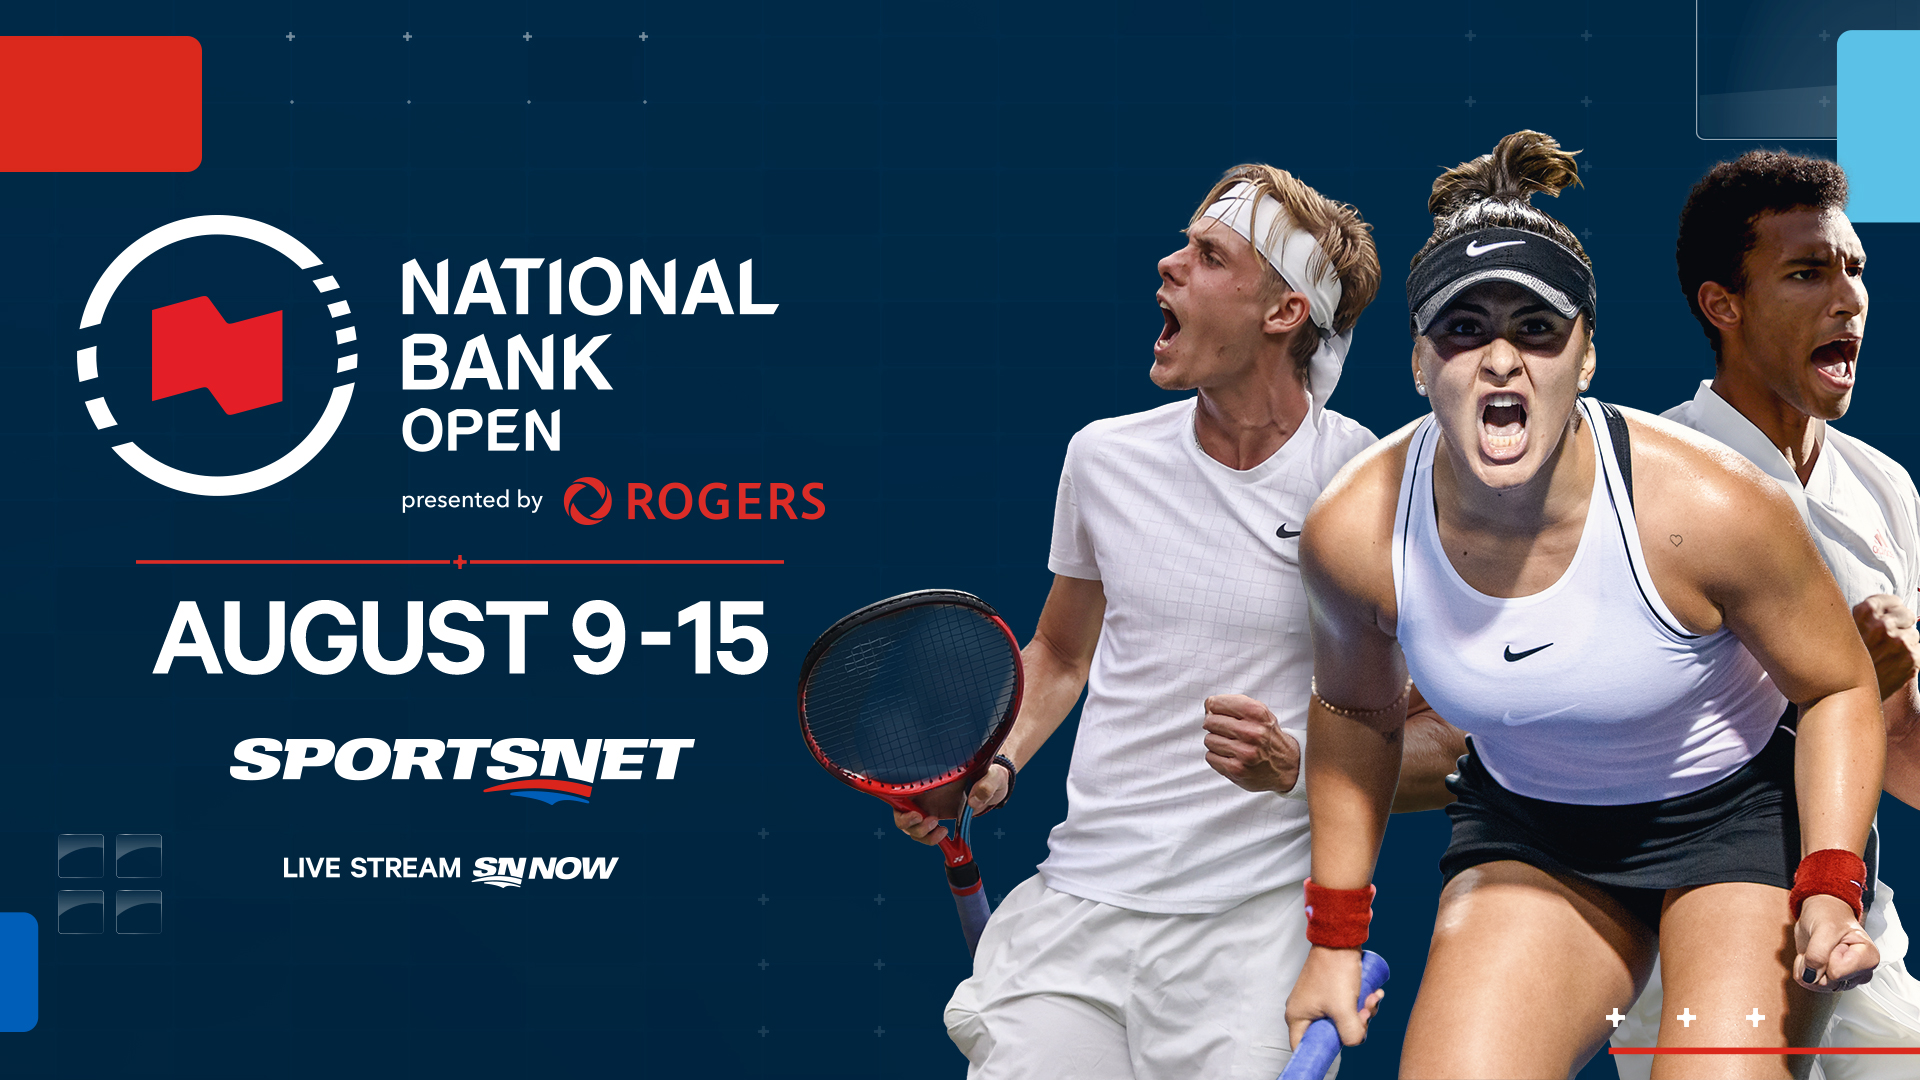 Sportsnet Serves Up Exclusive English-Language Coverage of the 2021 National Bank Open presented by Rogers, August 9-15 Rogers Sports and Media